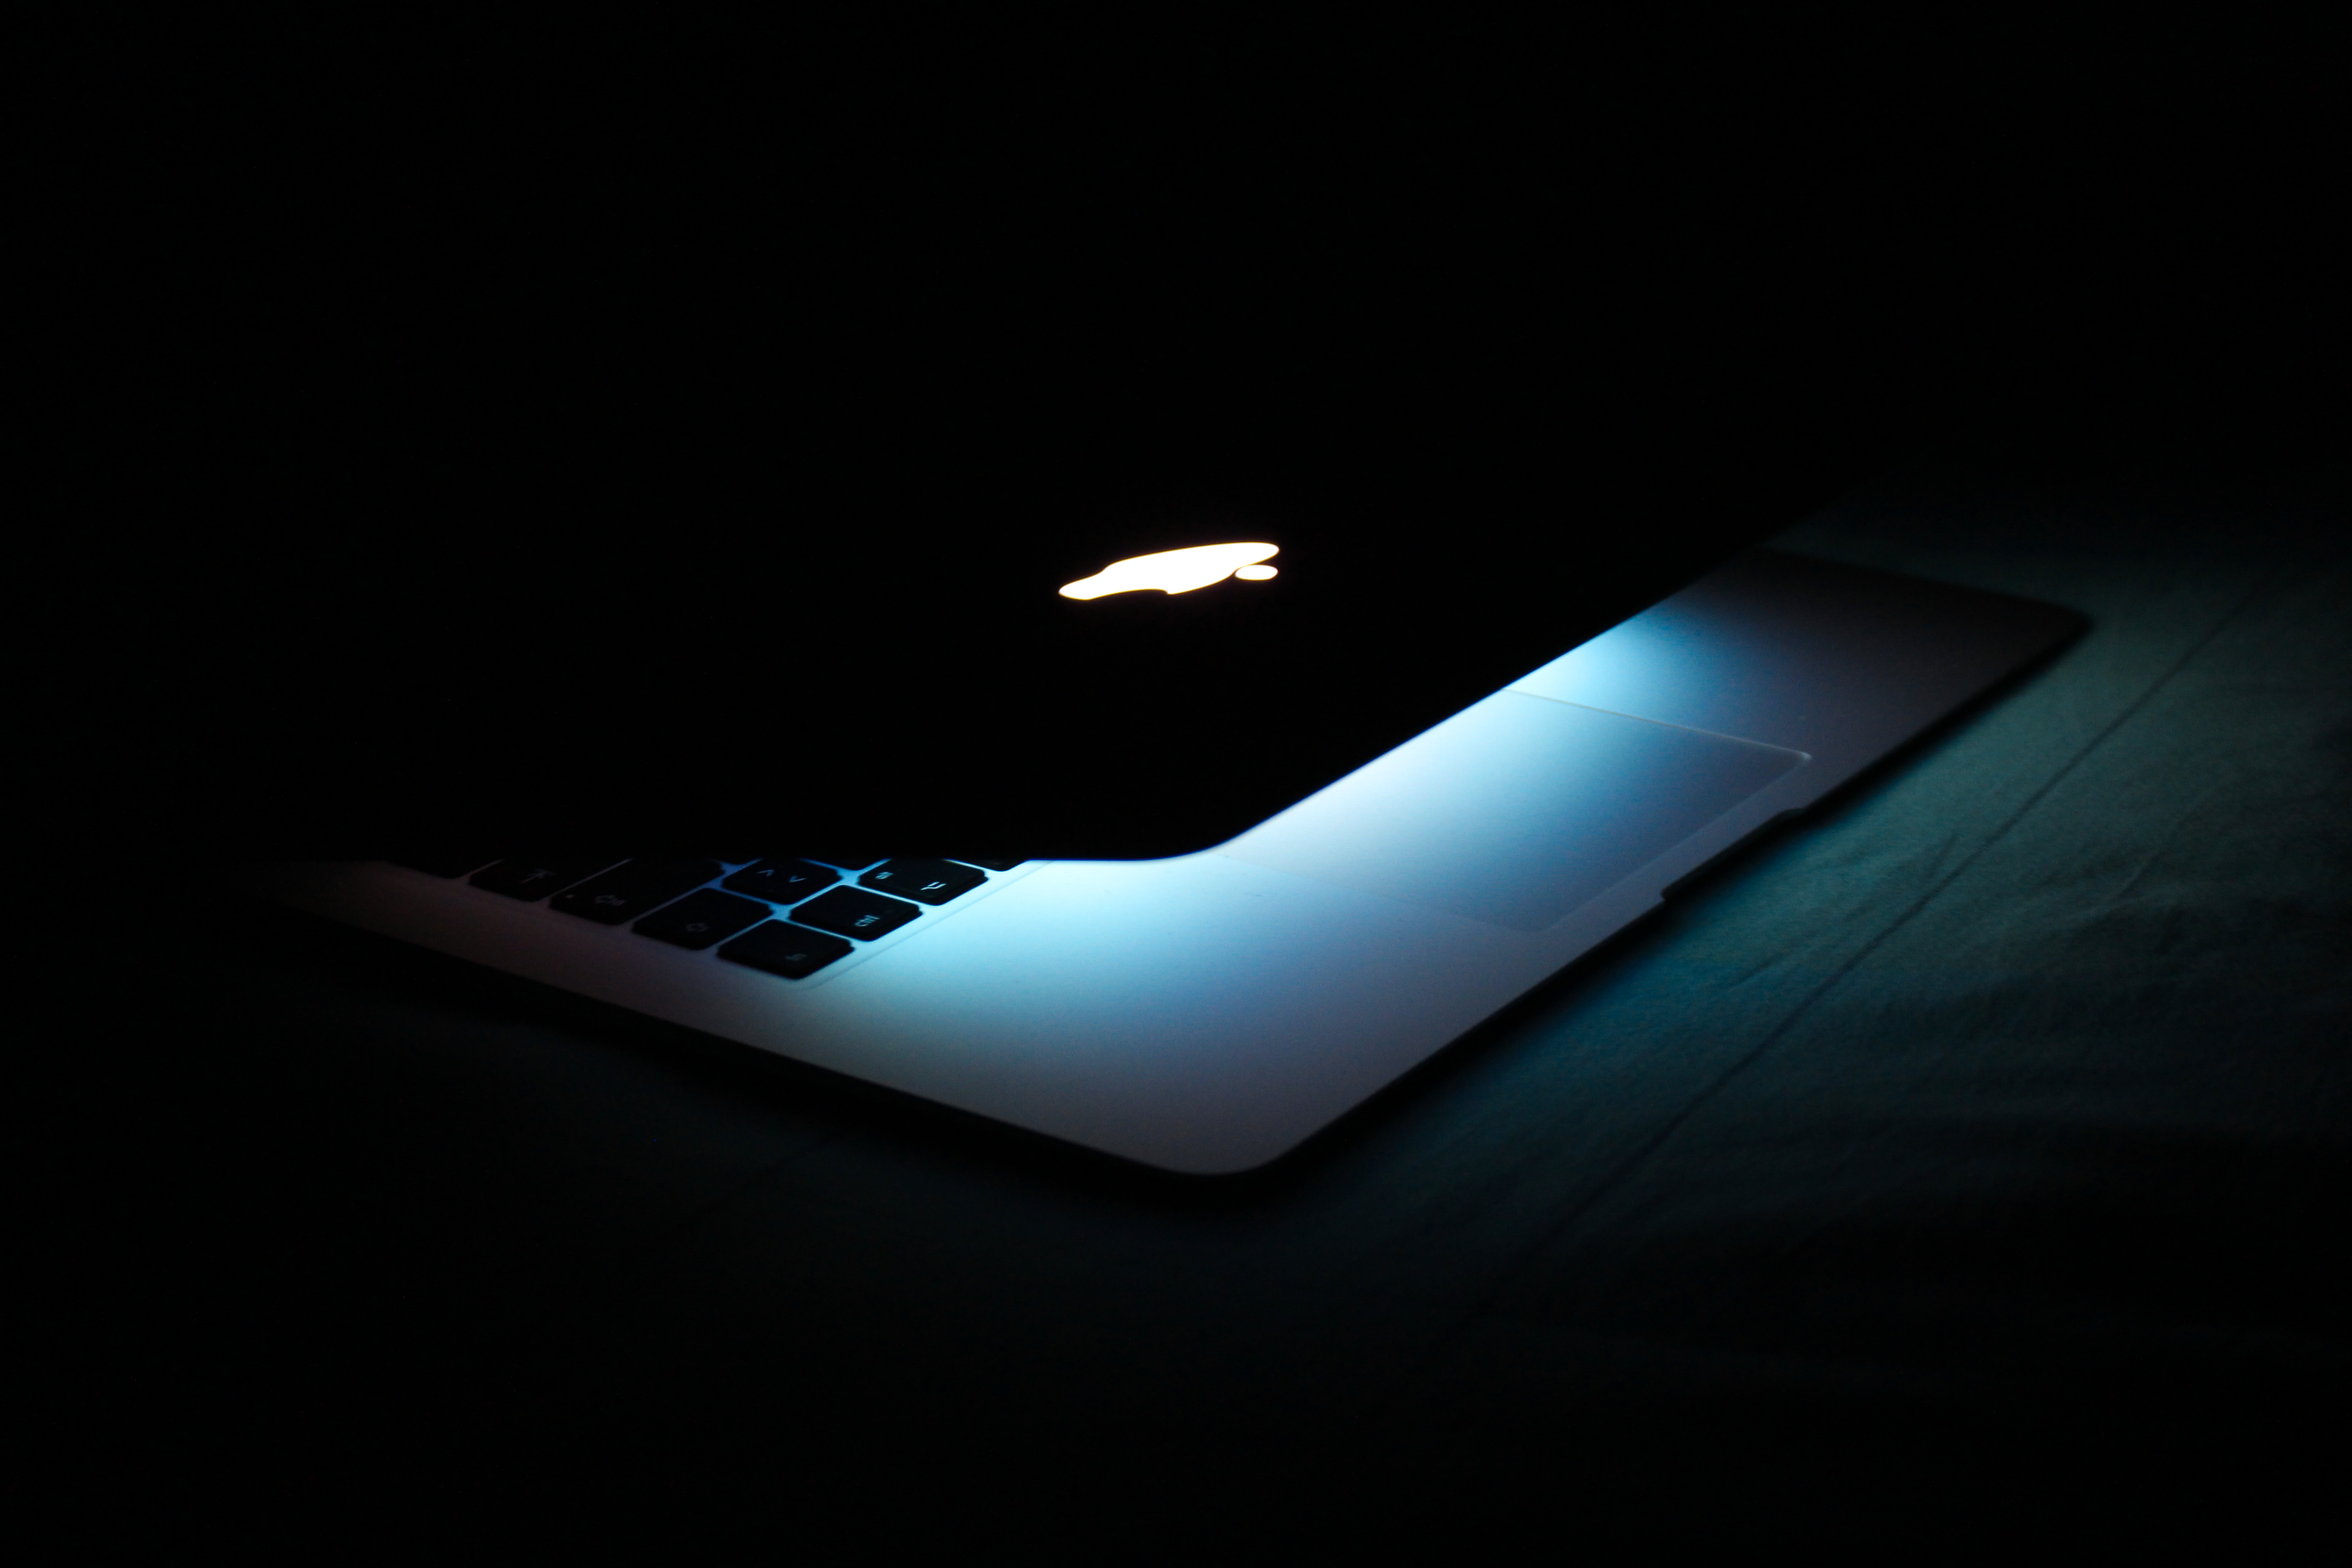 Photography of a Turned On Macbook, Apple device, Computer, Dark, Electronics, HQ Photo